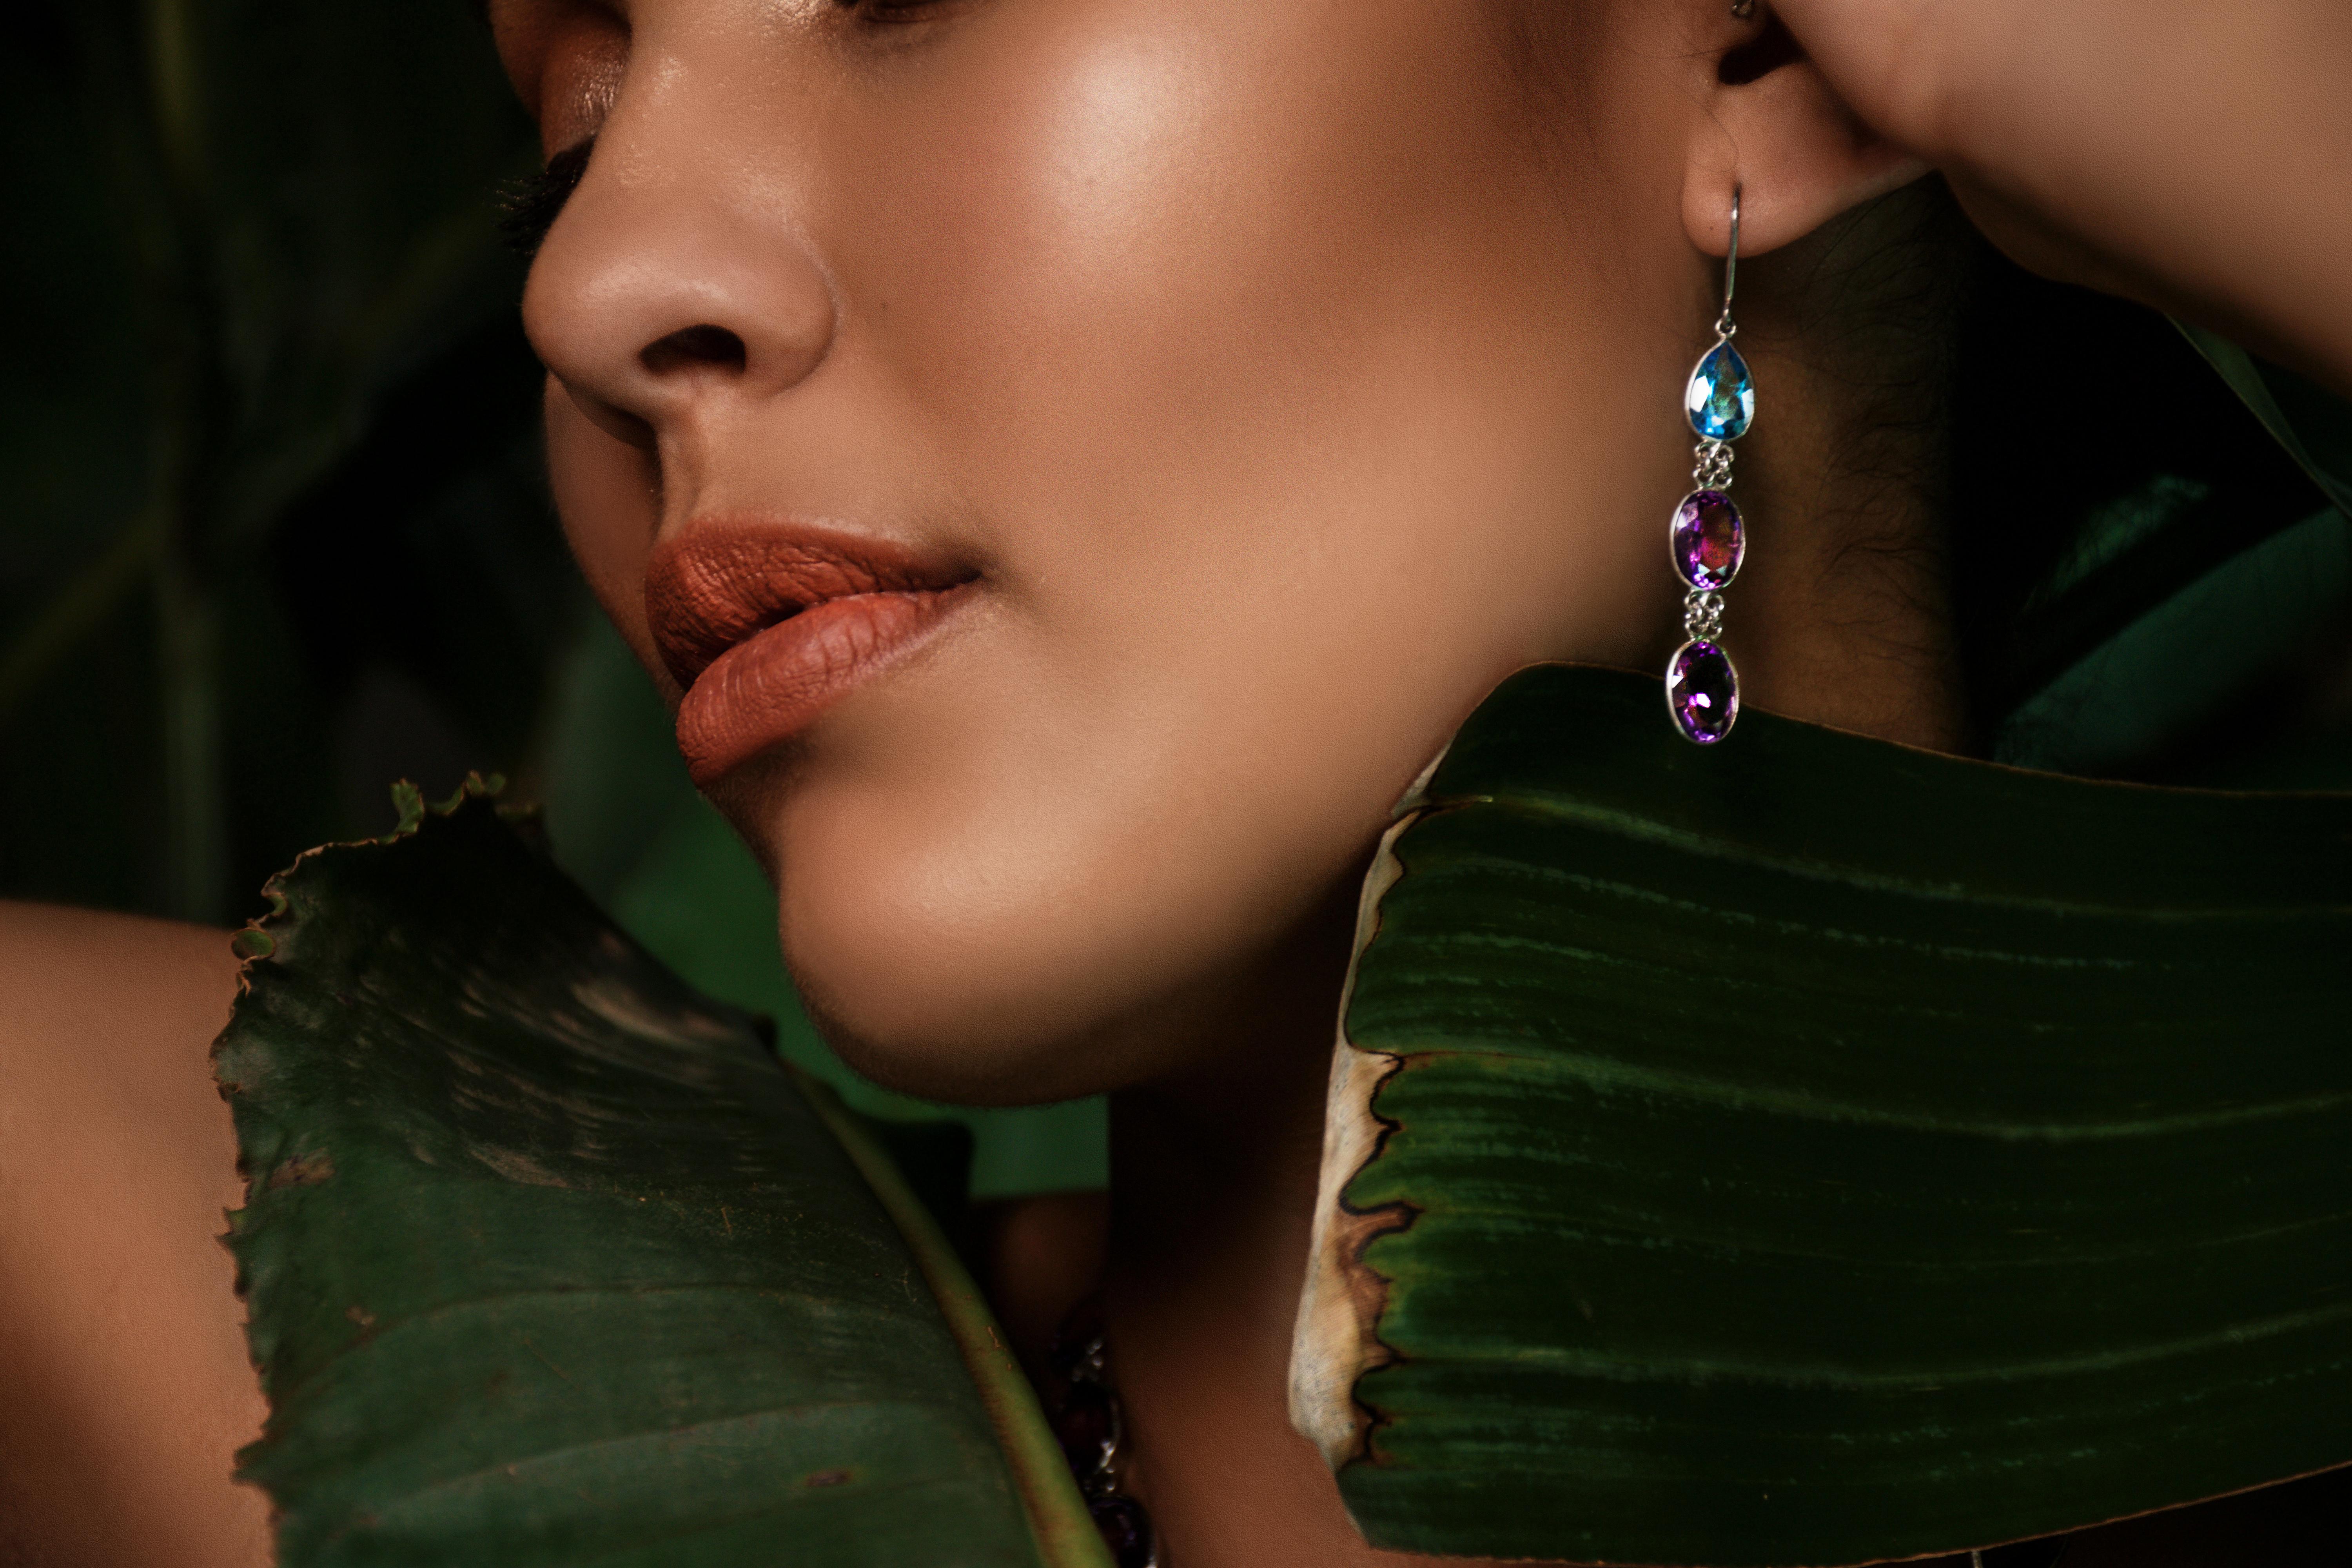 Introducing our Topaz & Amethyst Gemstone Link Drop Earrings of platinum coated sterling silver, a stunning fusion of two exquisite gemstones that epitomize elegance and allure. Each earring features a 2-carat pear-cut topaz gemstone at the top,